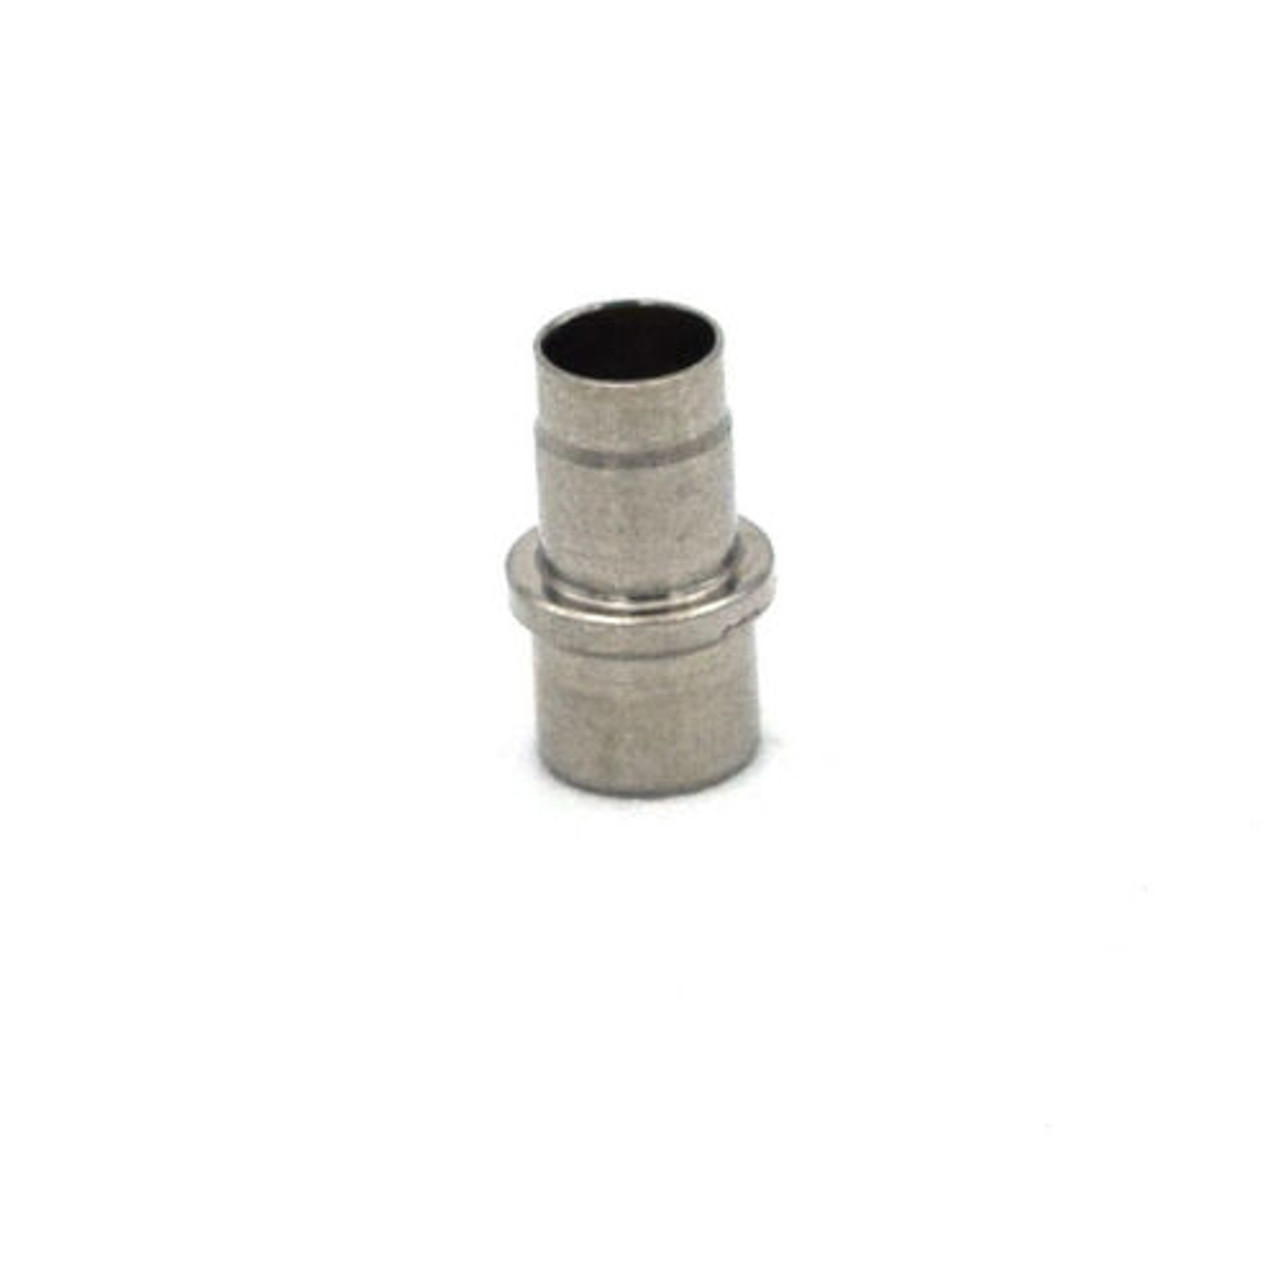 5.10 mm Tag Heuer Case Tube